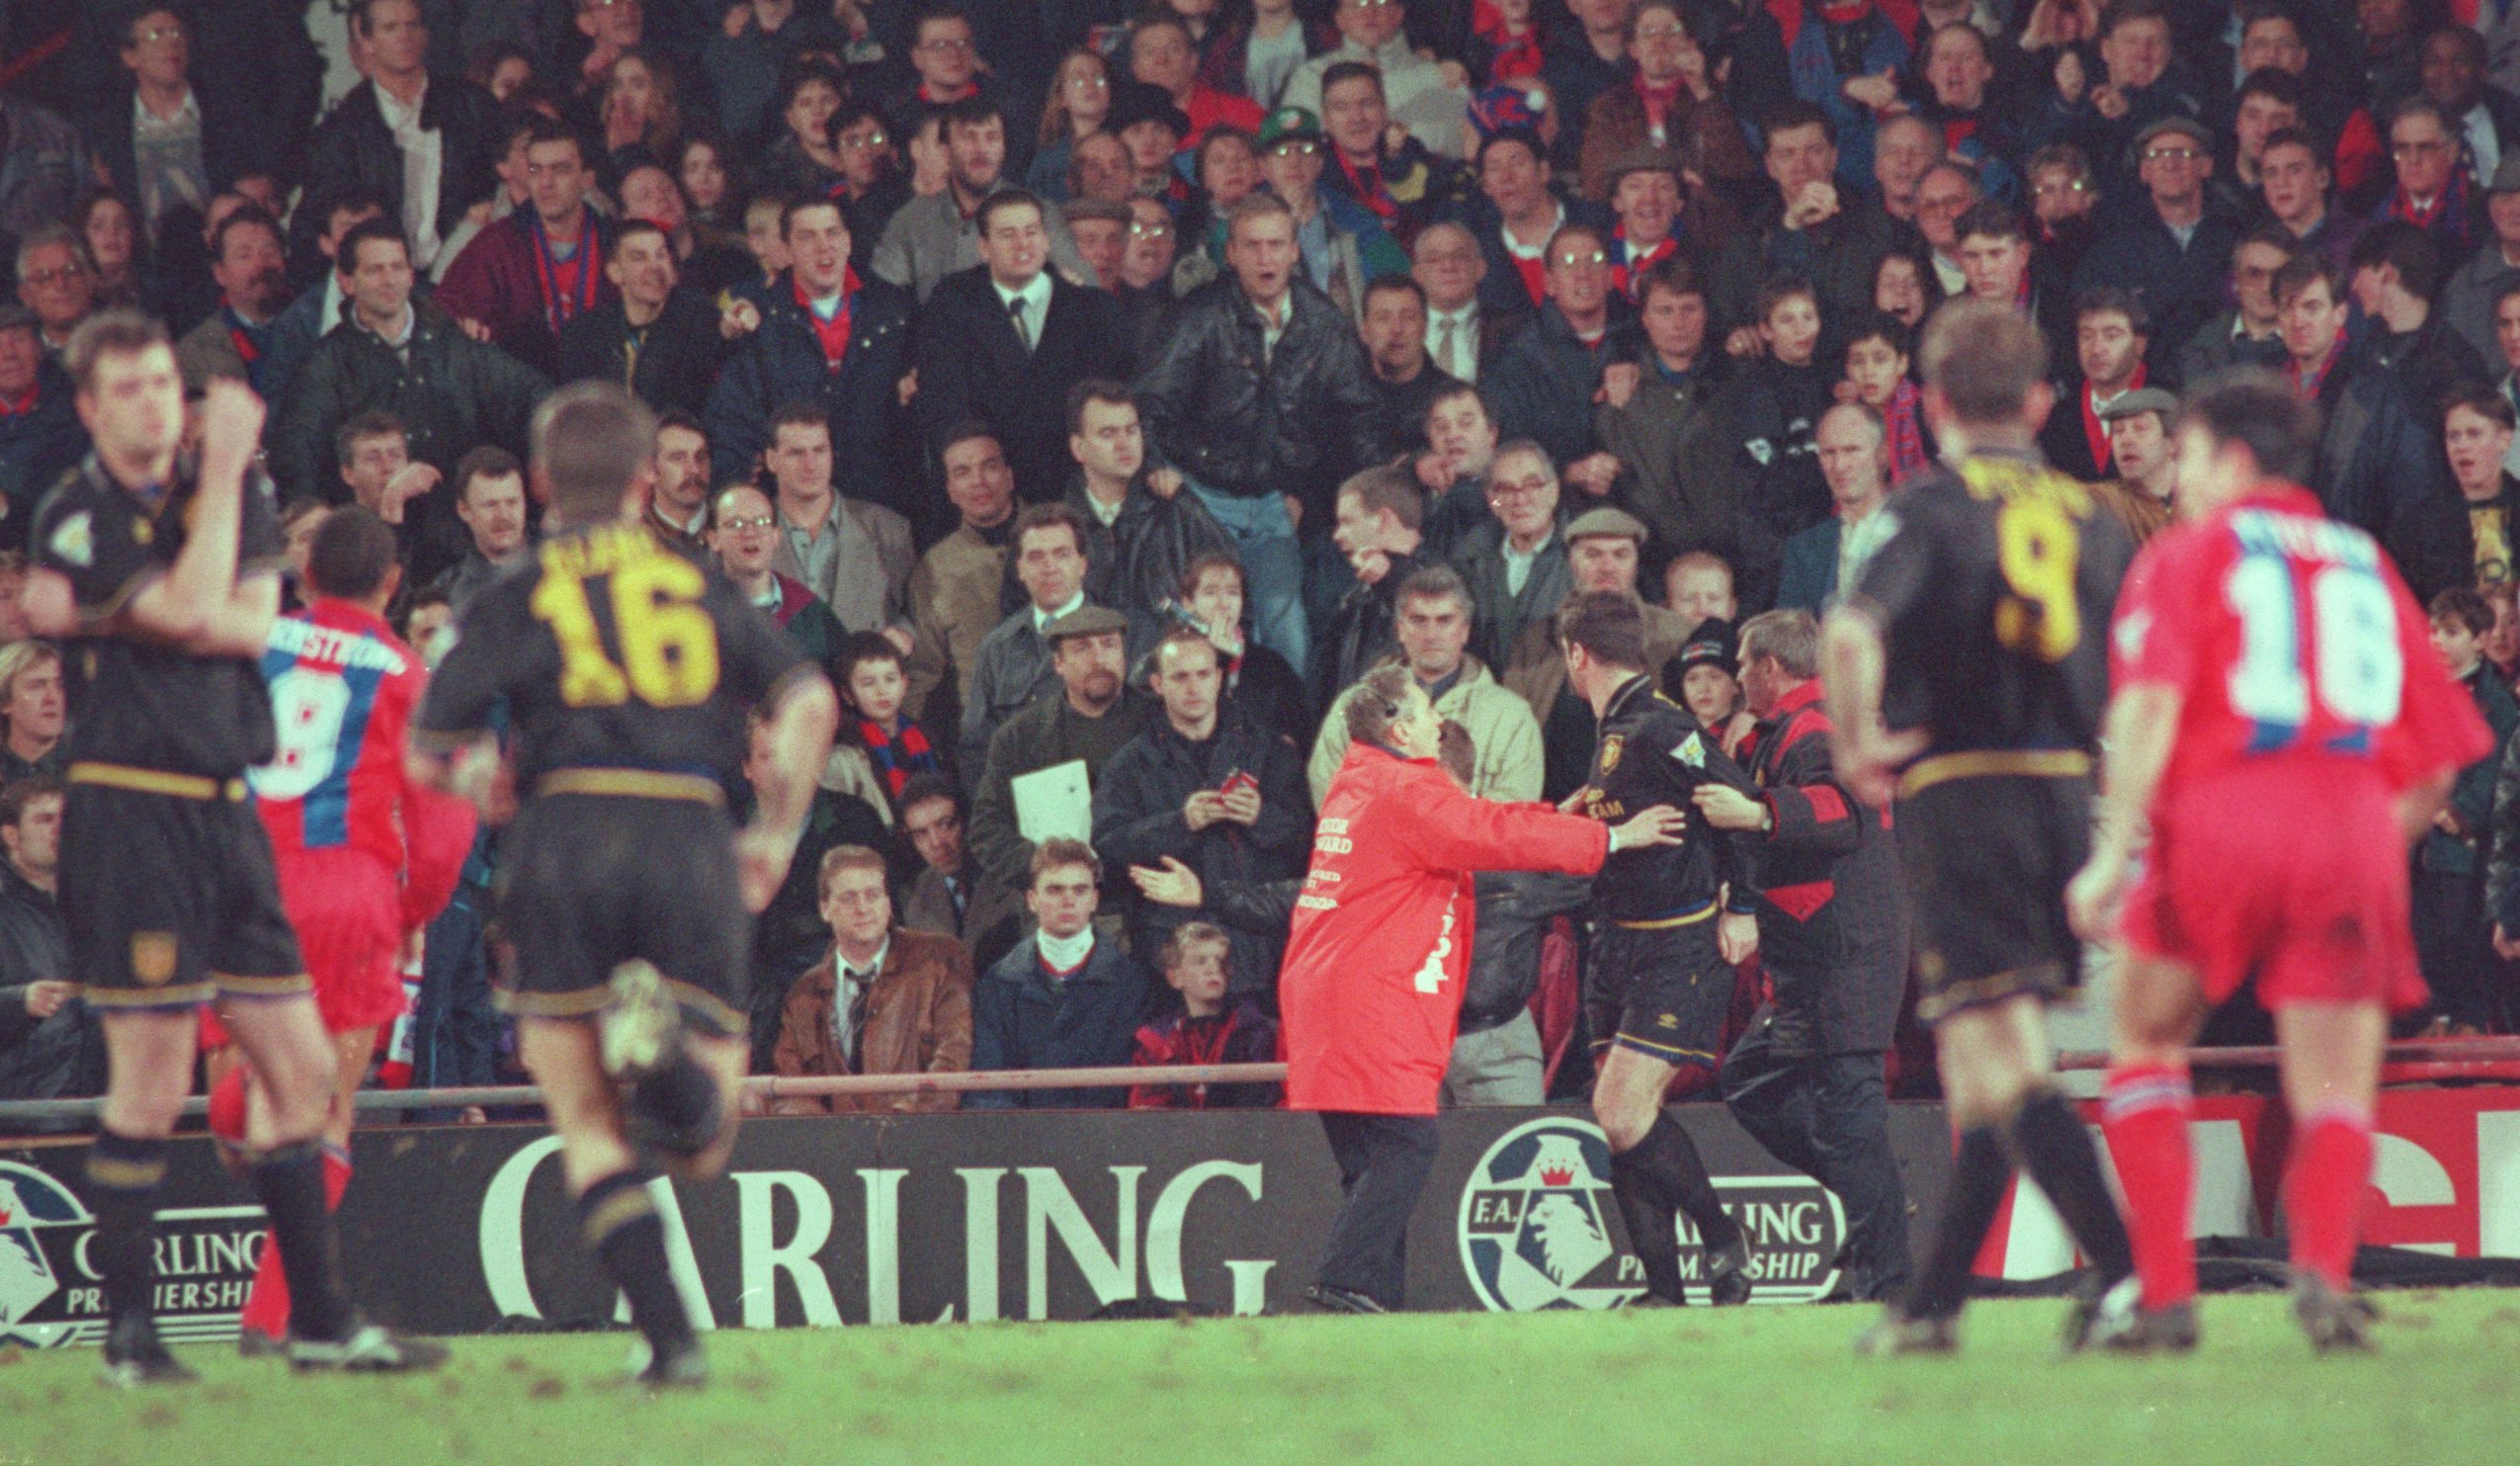 25 JAN 1995:  ERIC CANTONA OF MANCHESTER UNITED IS INVOLVED IN A FIGHT WITH A FAN AFTER HE WAS SENT OFF DURING THE CRYSTAL PALACE V MANCHESTER UNITED MATCH AT SELHURST PARK. Mandatory Credit: Shaun Botterill/ALLSPORT